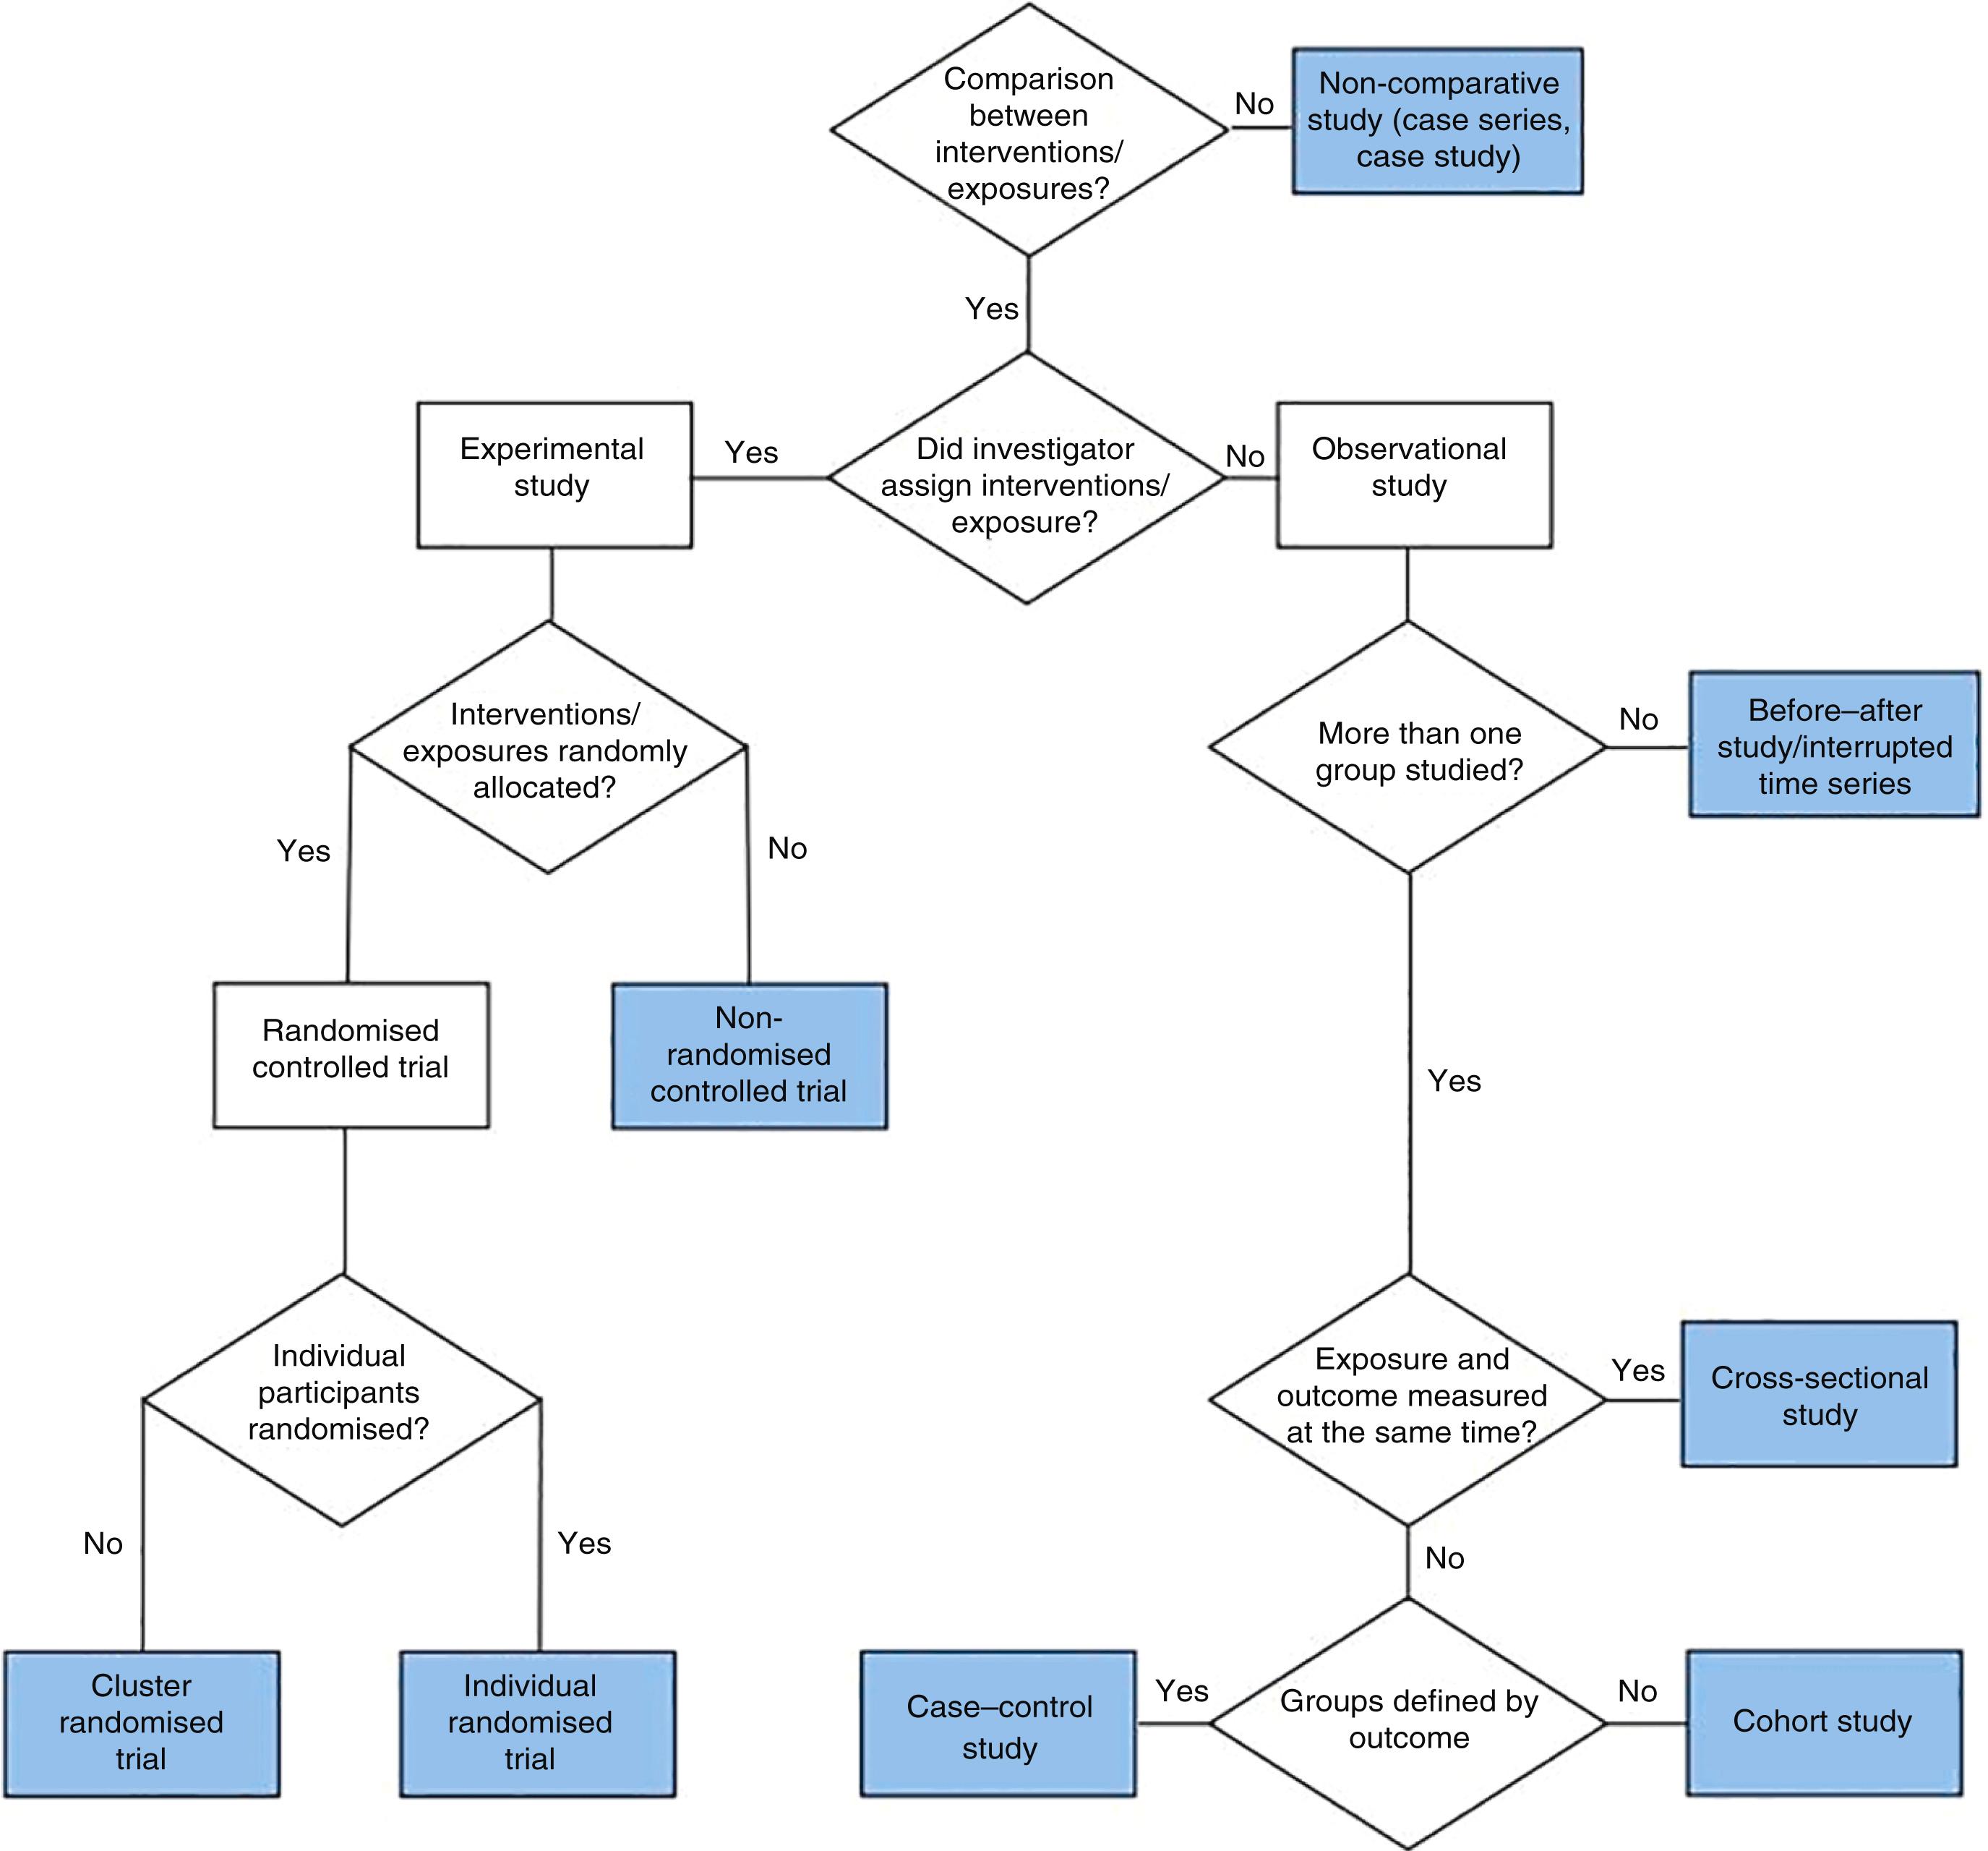 Figure 1.1, Defining study design flowchart. 10 (© NICE [2012] Methods for the development of NICE public health guidance [3rd edition]. Available from https://www.nice.org.uk/process/pmg4/resources/methods-for-the-development-of-nice-public-health-guidance-third-edition-pdf-2007967445701 . All rights reserved.)